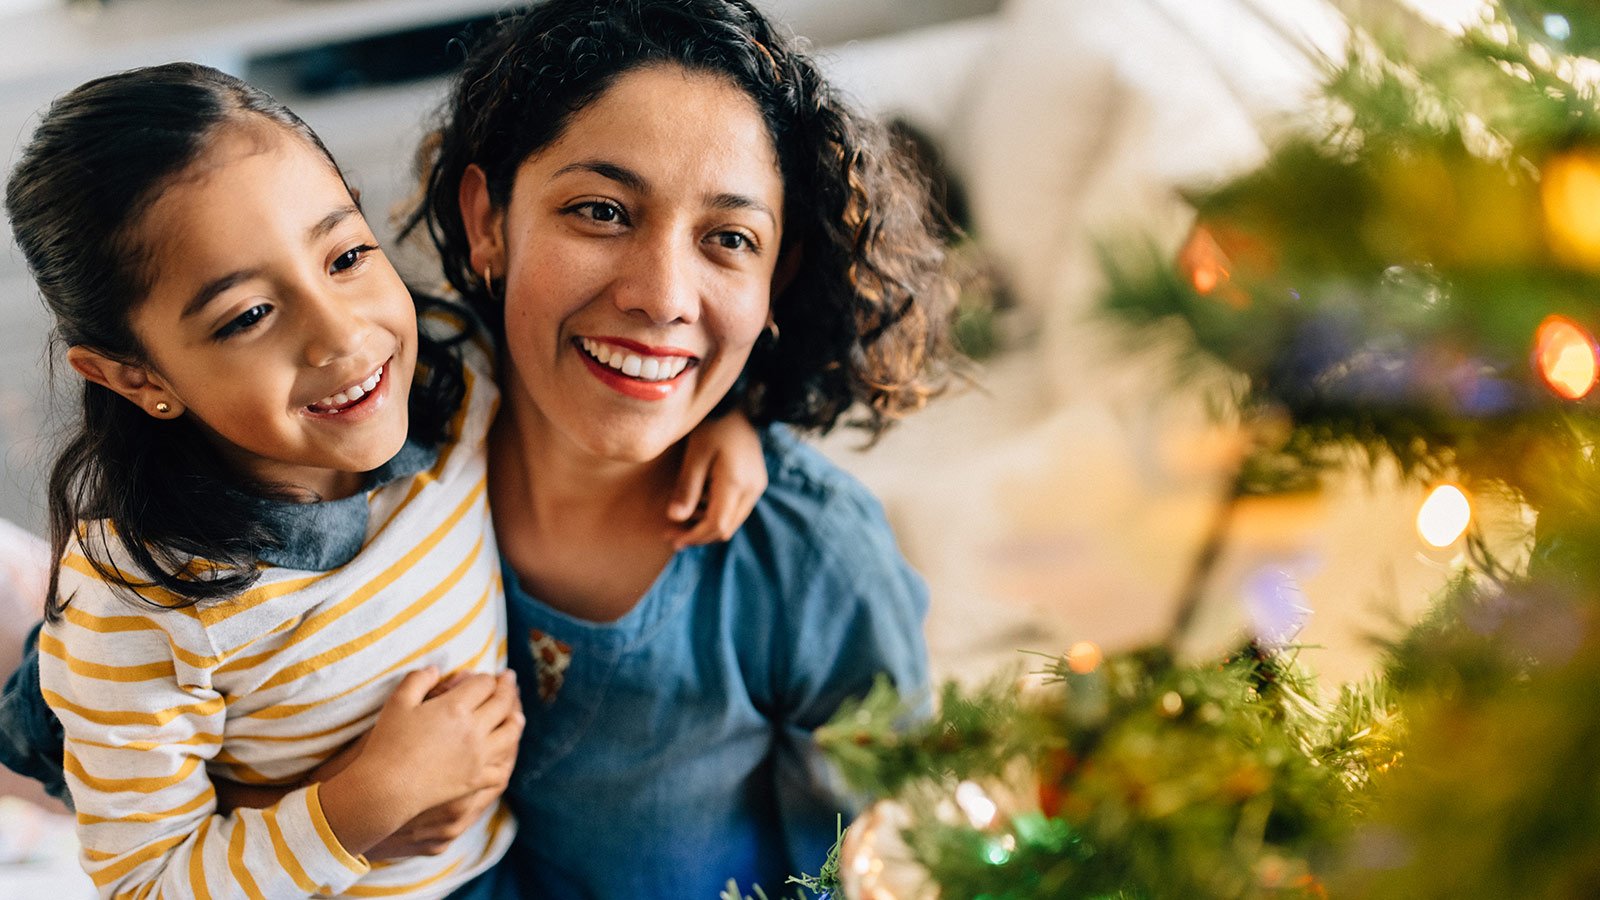 4 Ways to Make the Holiday Meaningful